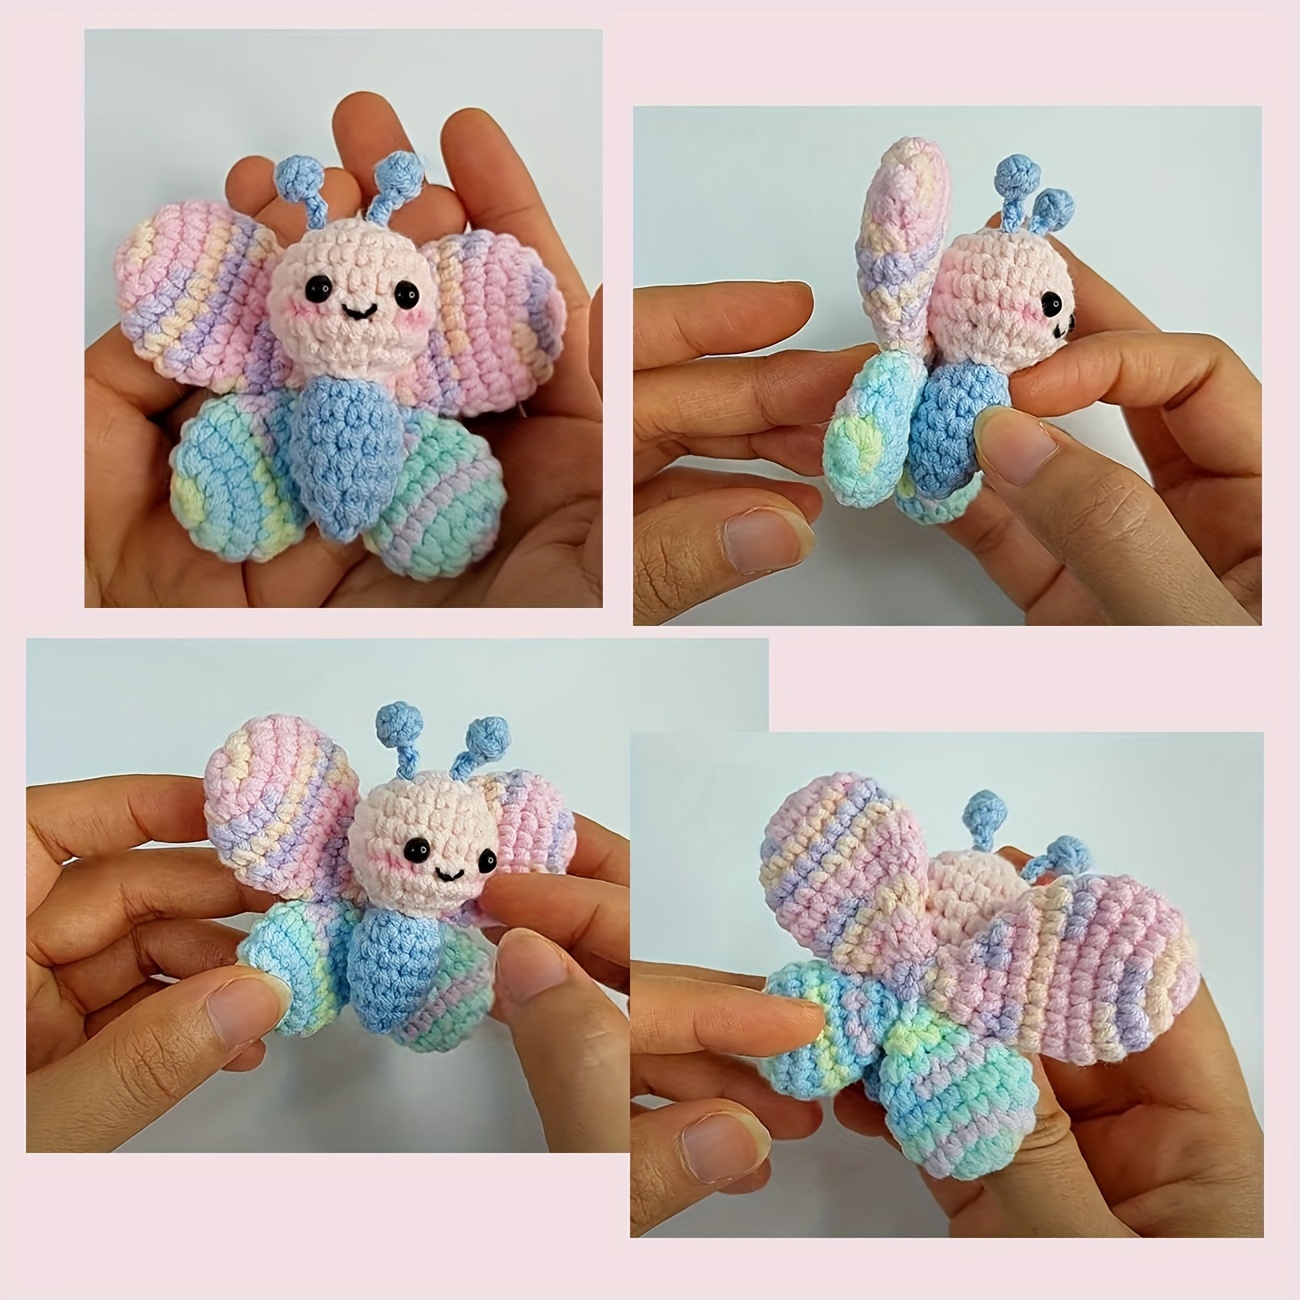 

Diy Crochet Butterfly Kit For Beginners With Step-by-step Video Tutorial - Complete Crochet Set With Yarn, Hook, Safety Eyes, And Fiberfill - Pink & Blue Fabric Material - All Seasons Crafting Project